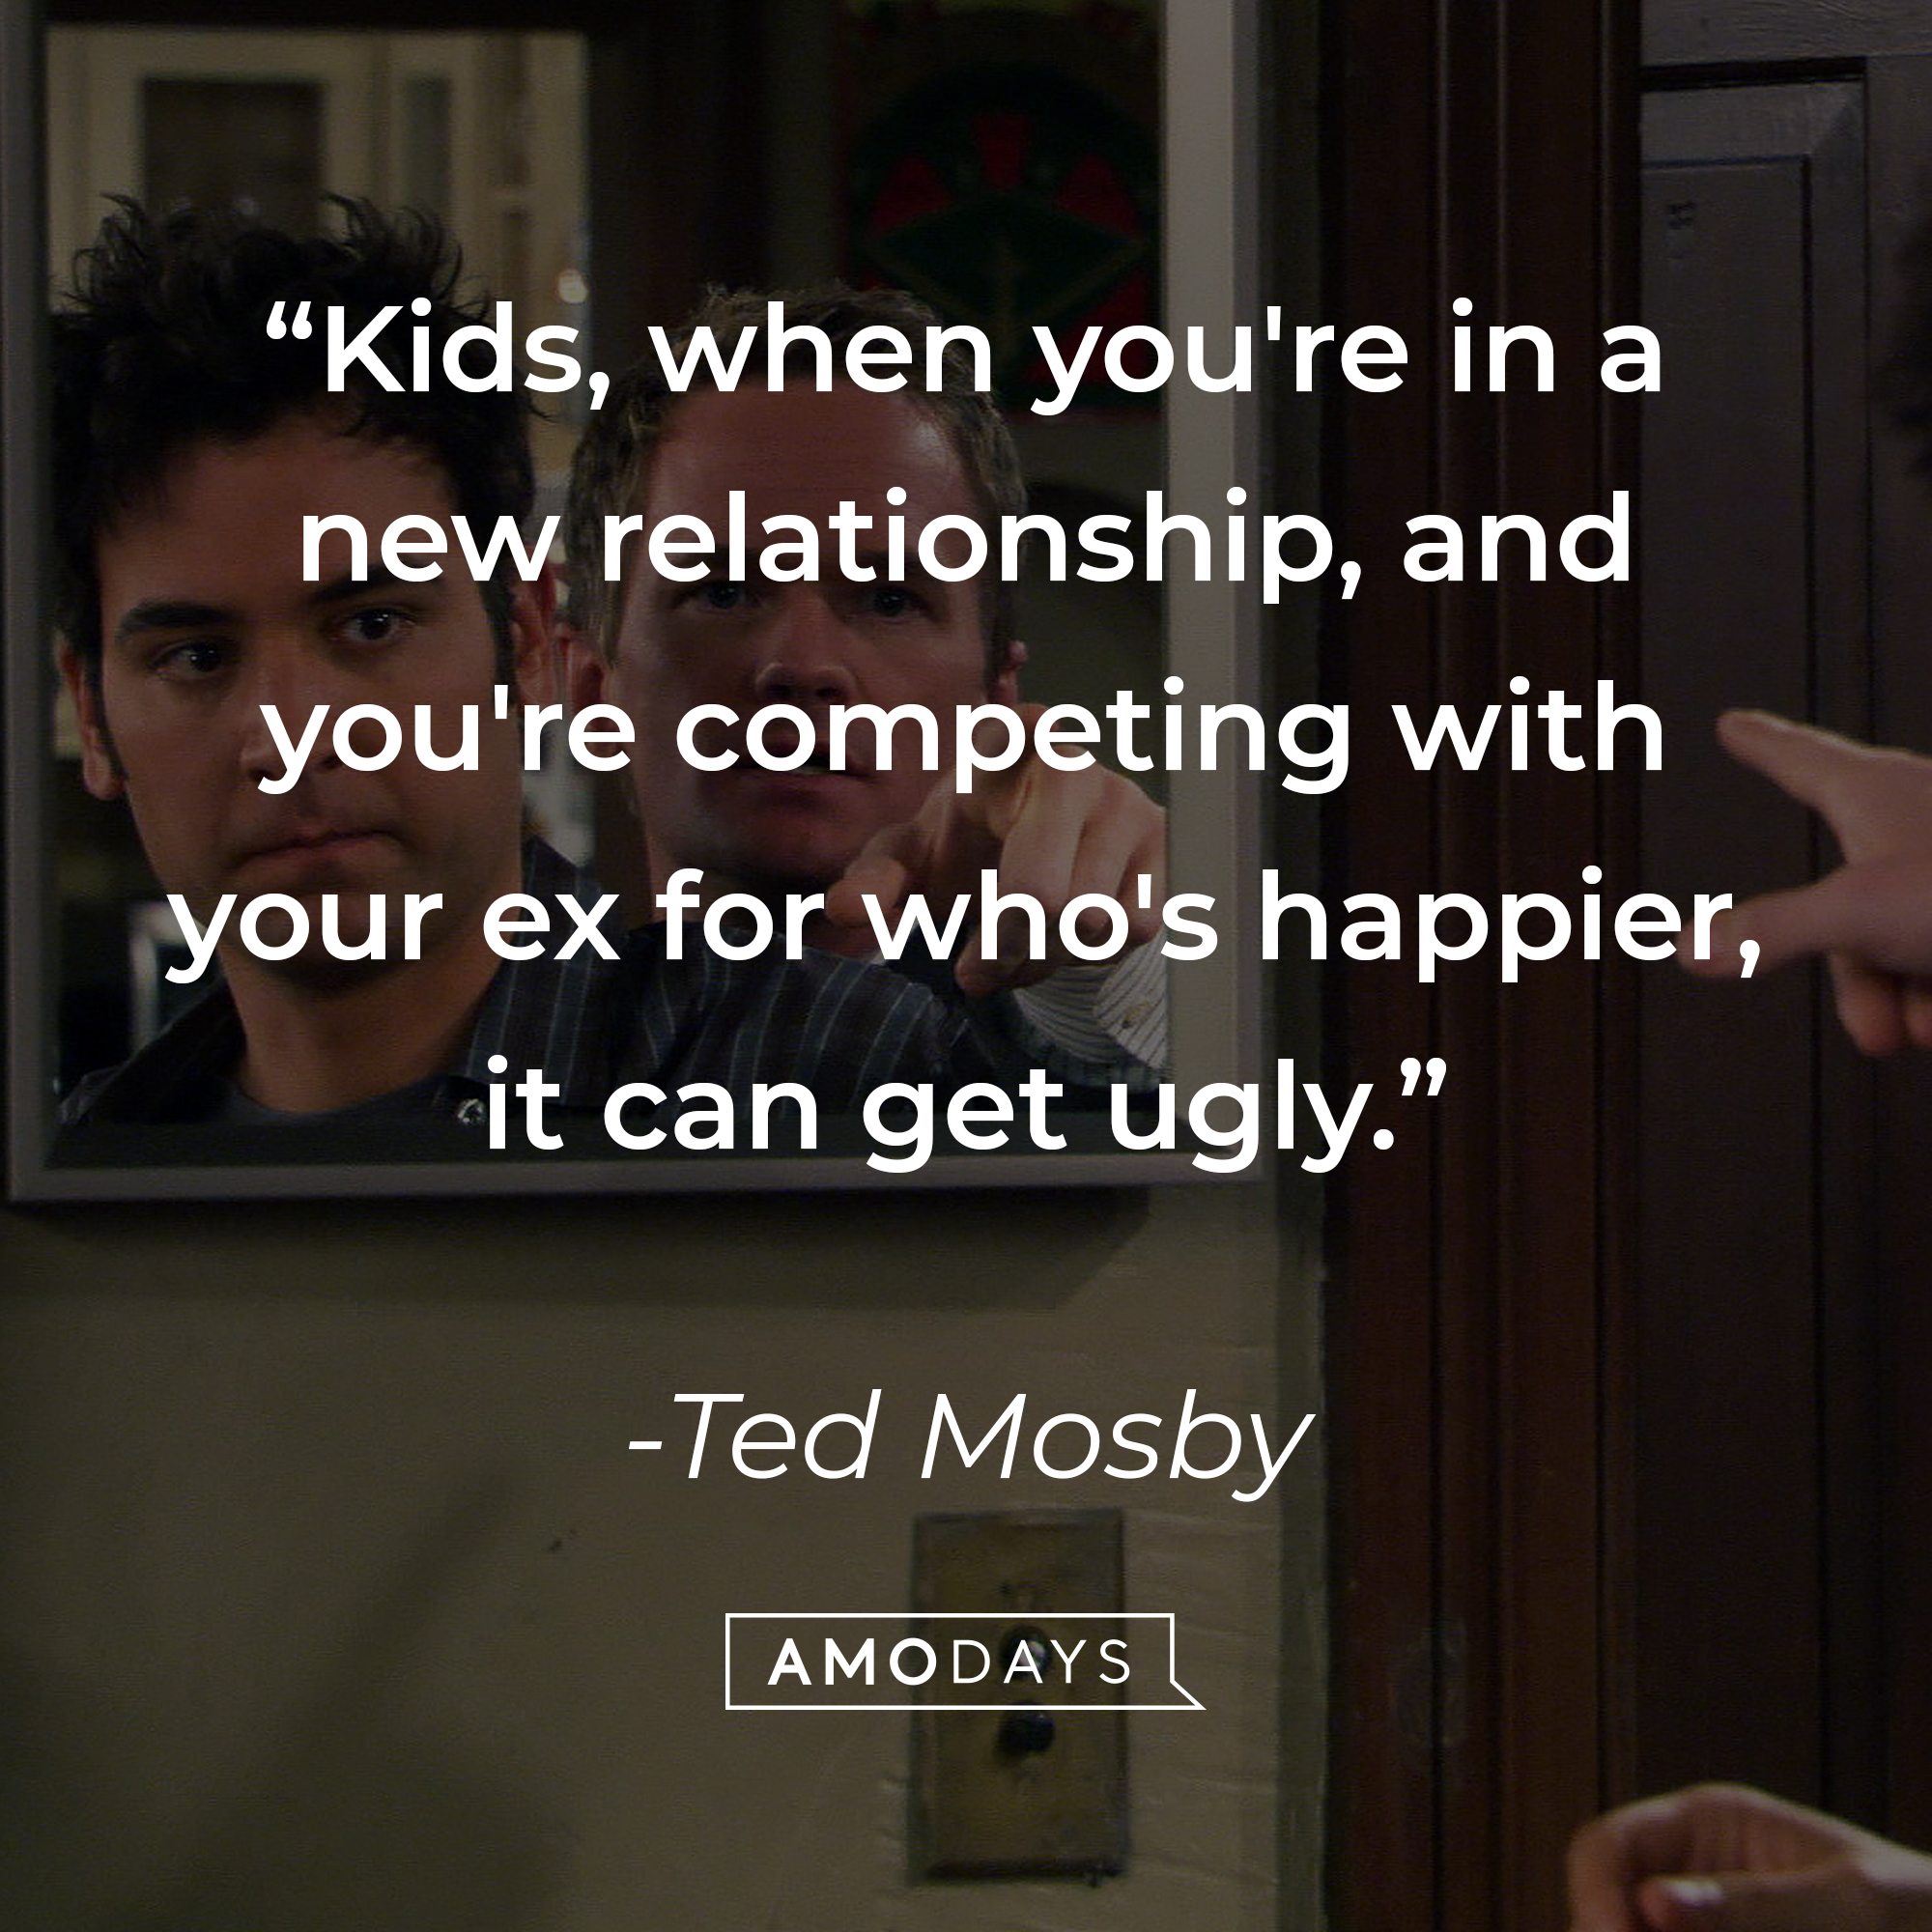 Ted Mosby's quote: “Kids, when you're in a new relationship, and you're competing with your ex for who's happier, it can get ugly.” | Source: facebook.com/OfficialHowIMetYourMother